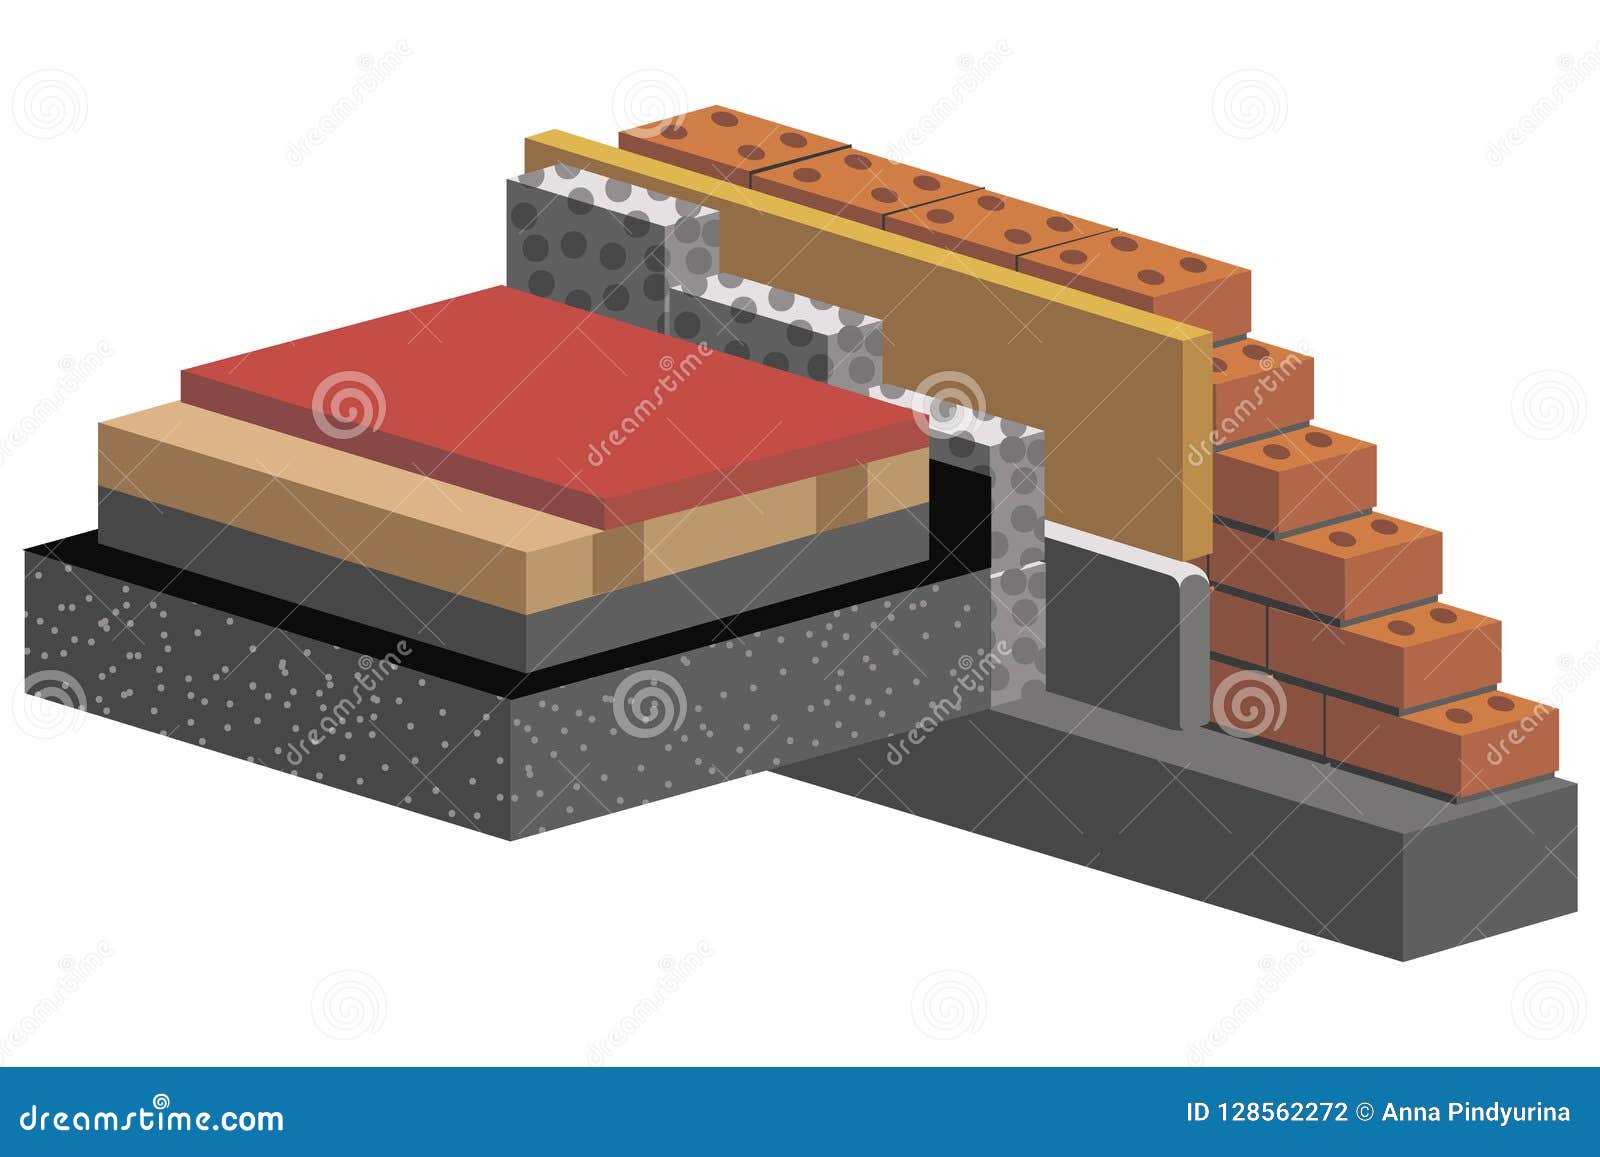 Timber Floating Floor In Cut With Text Poster Stock Vector